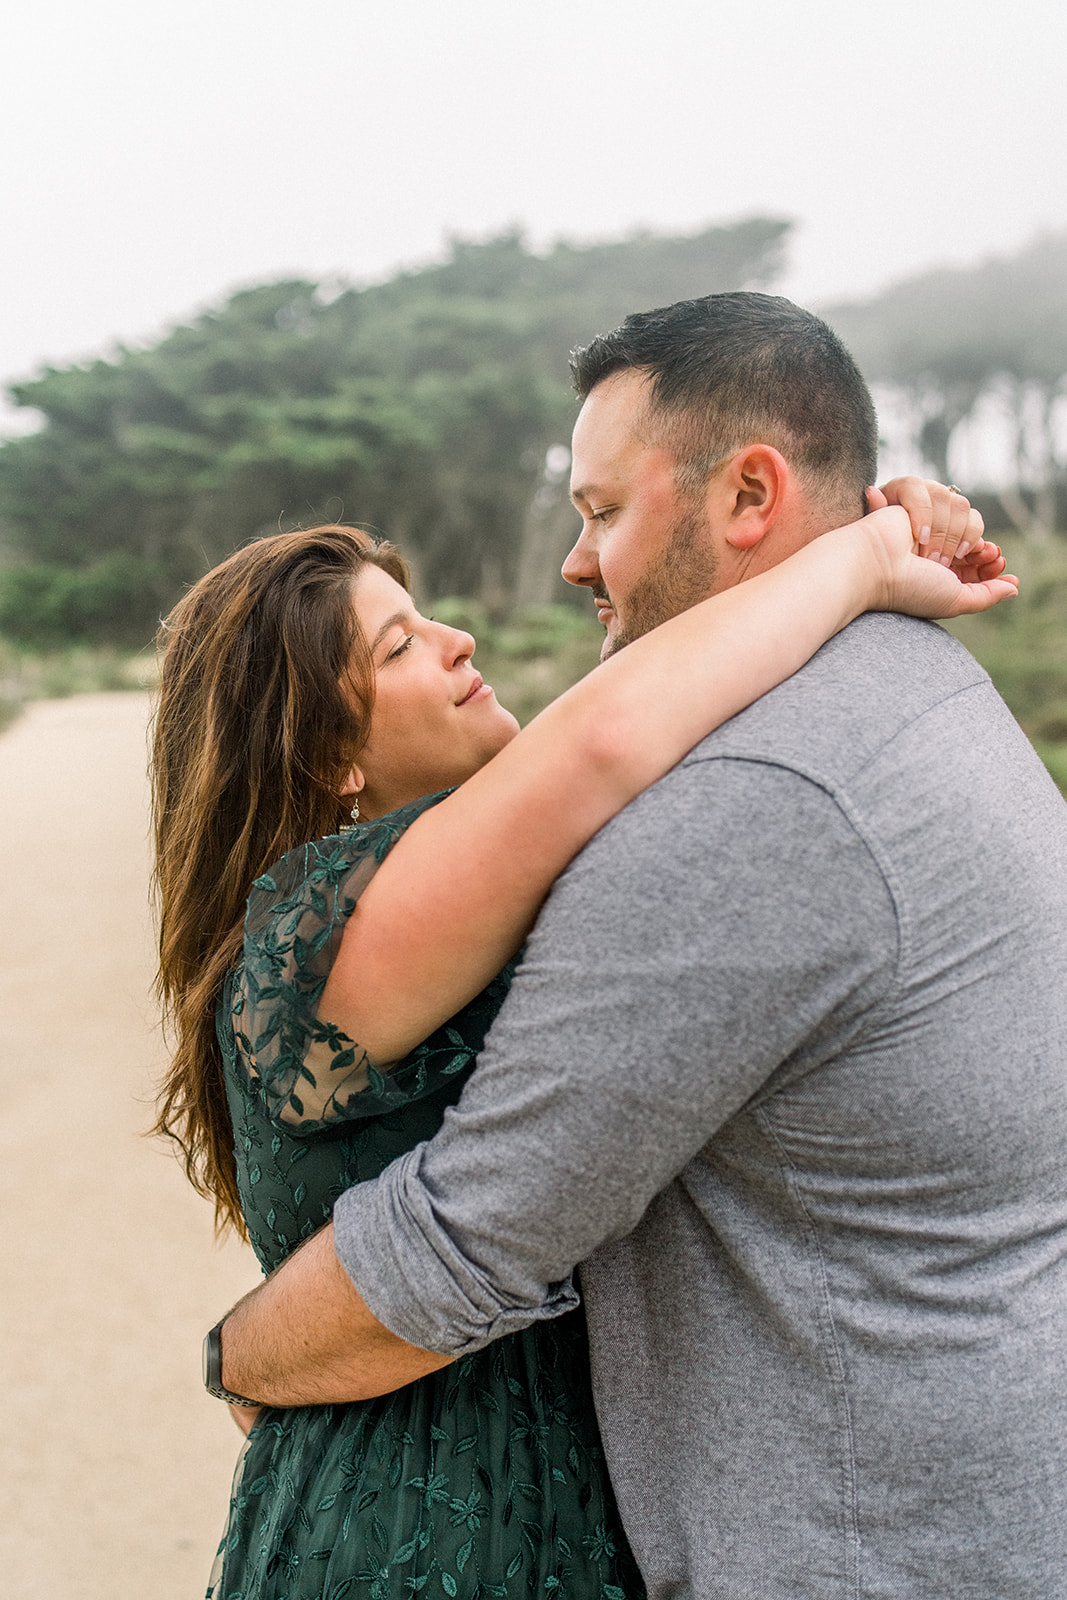 A couple celebrates their engagement in the Cypress trees in fog at Lands End San Francisco CA.